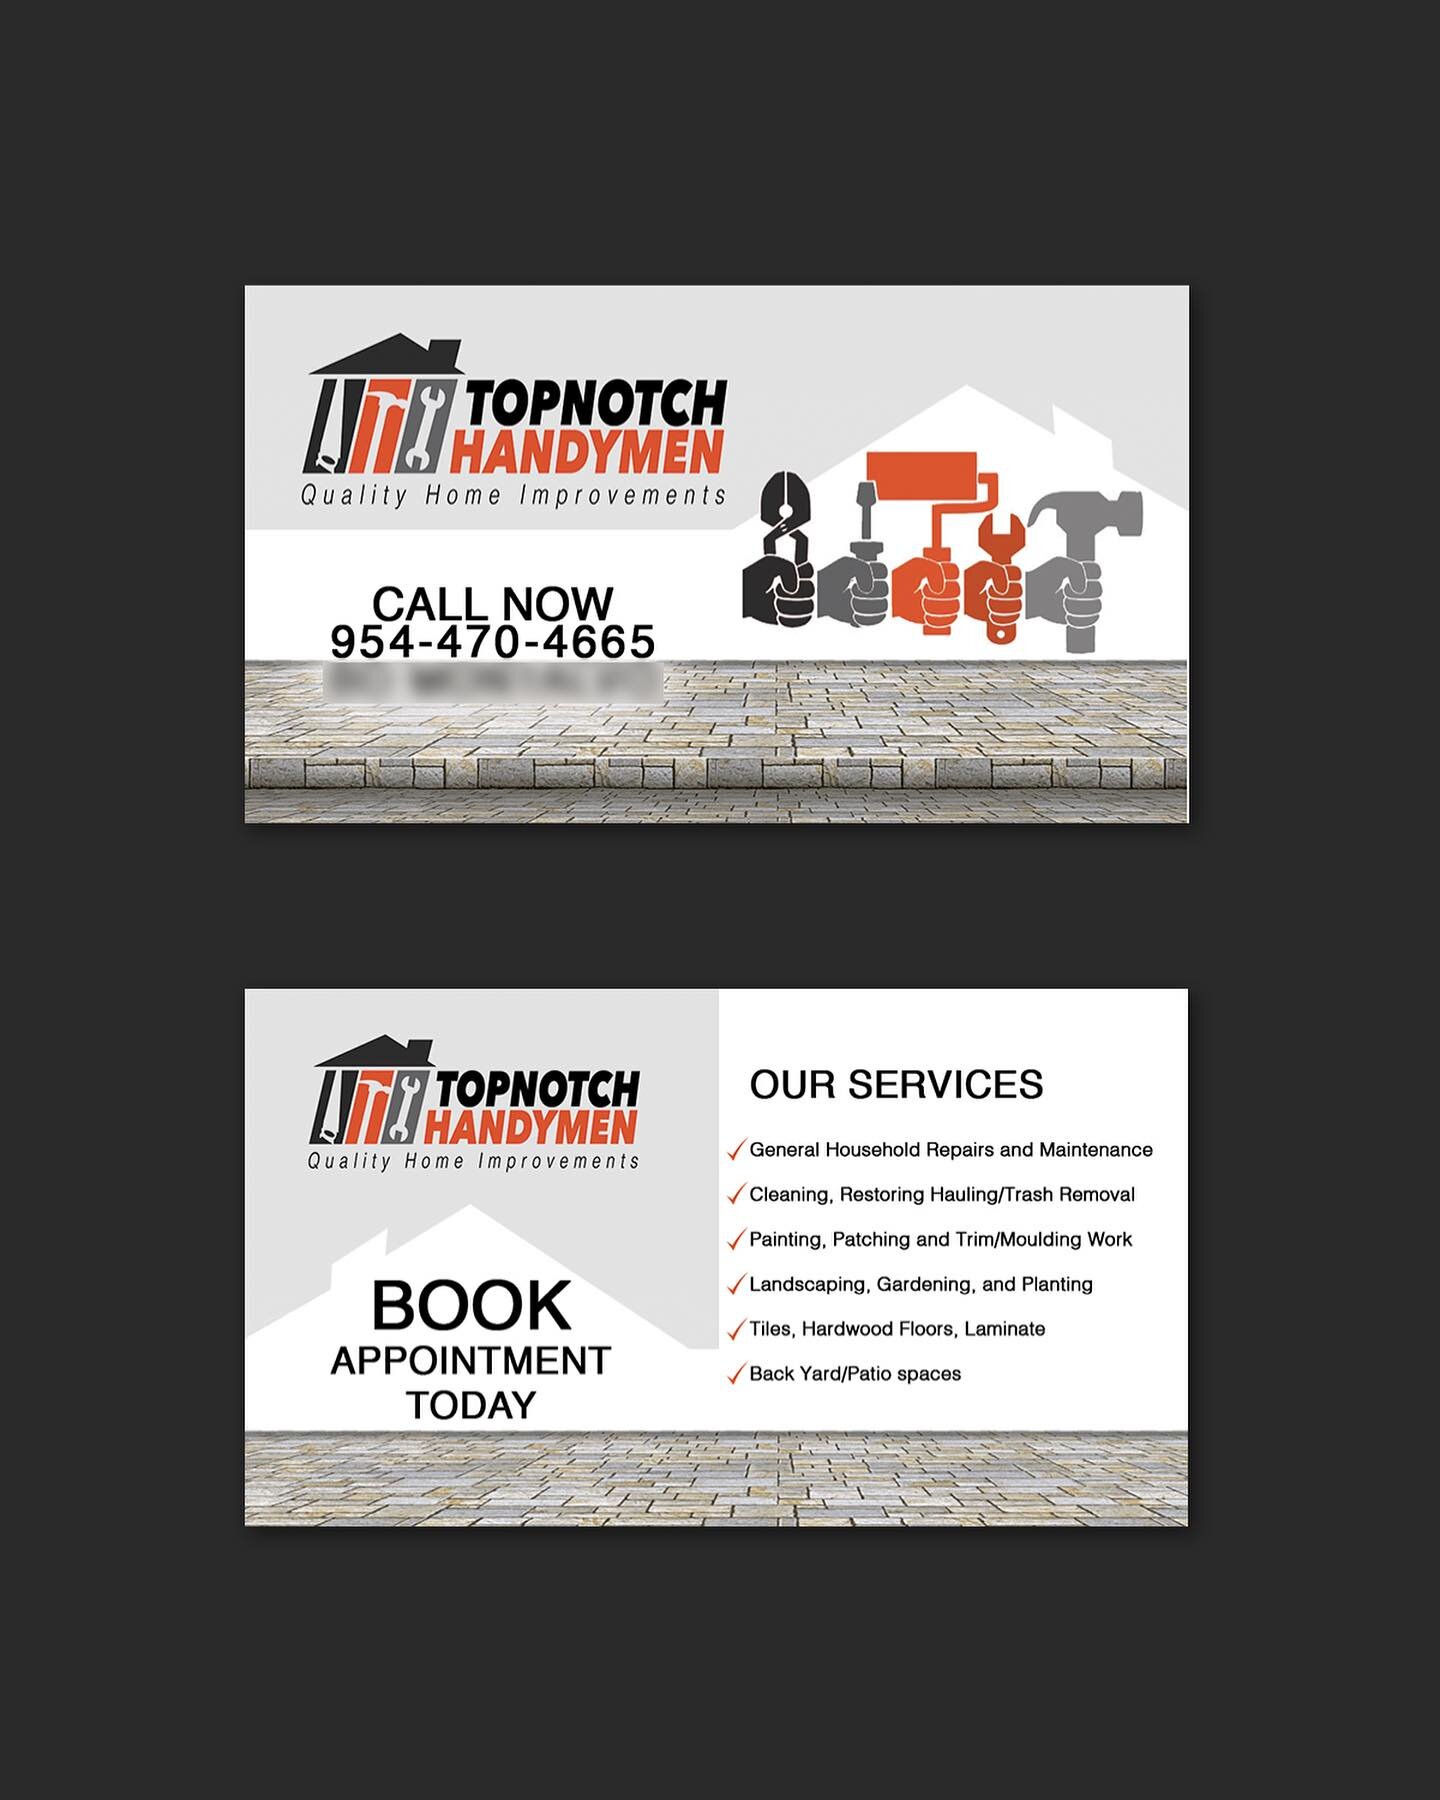 Business card layout design and print for @topnotchhandymen 

✨ Small but mighty &ndash; your business card can leave a lasting impact. Discover our tailored design and top-quality printing services. 

✨Message us for your cards today!

&mdash;&mdash